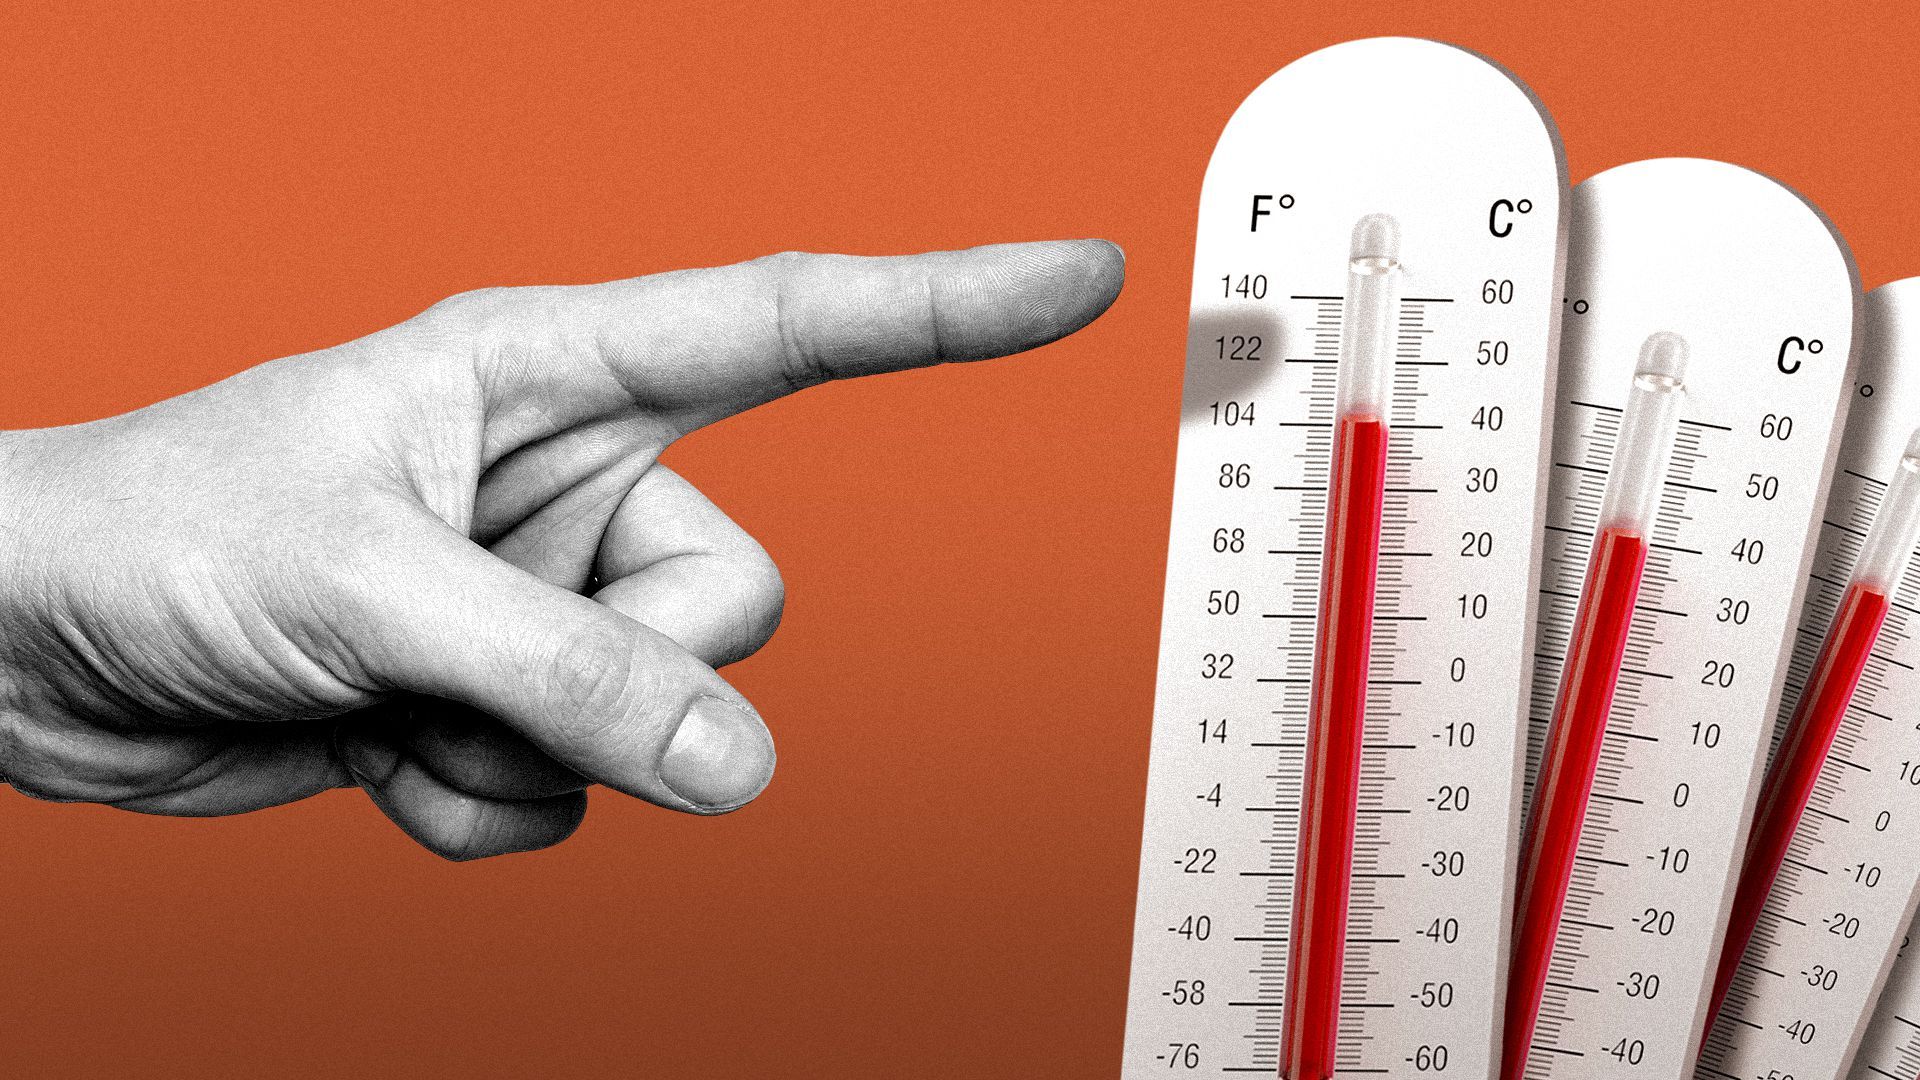 Illustration of a hand tipping over a stack of thermometers.